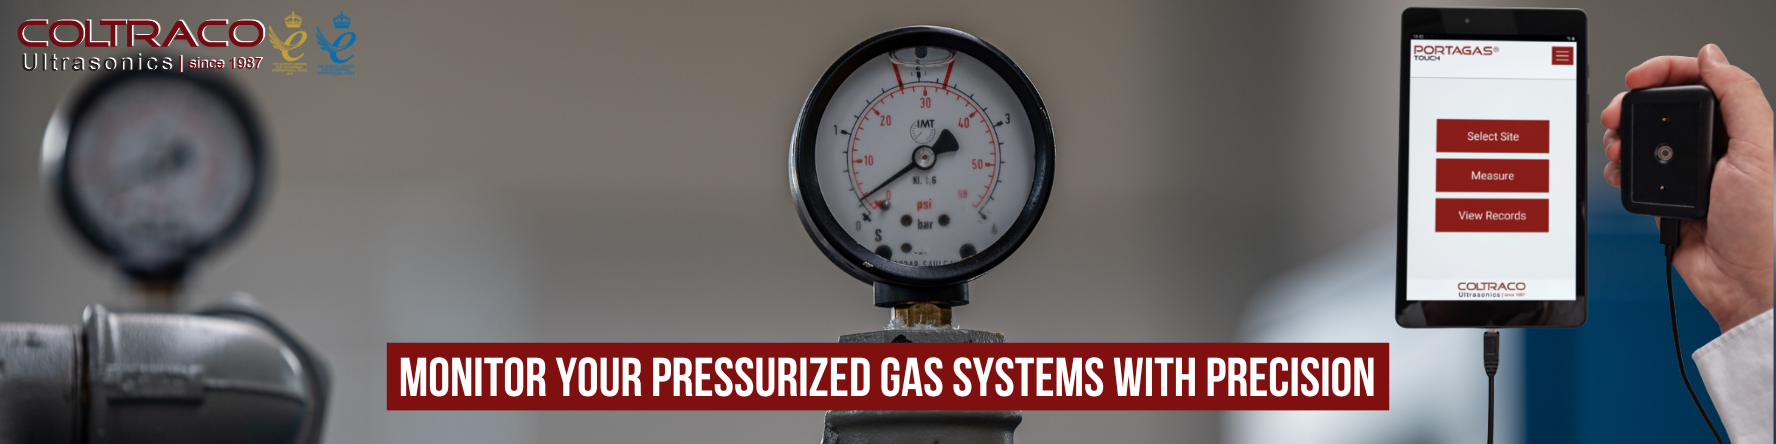 Monitor Your Pressurized Gas Systems with Precision - Portagas® is the Solution You Need!